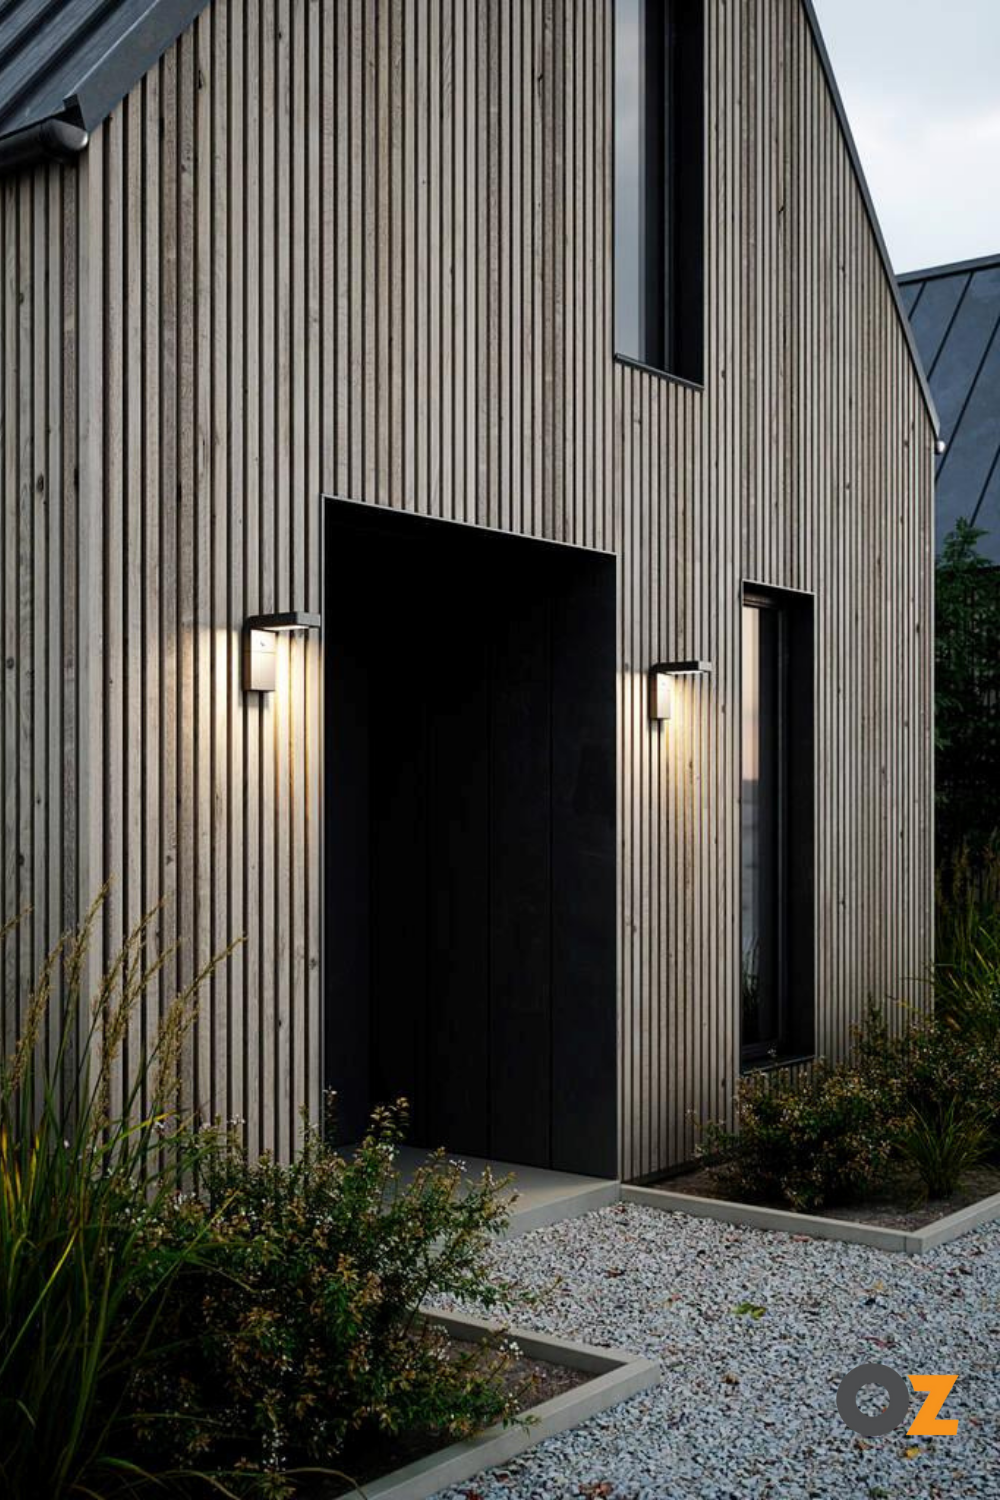 Exterior Wall Lighting Illuminate Your Outdoor Space with These Creative Wall Lighting Ideas